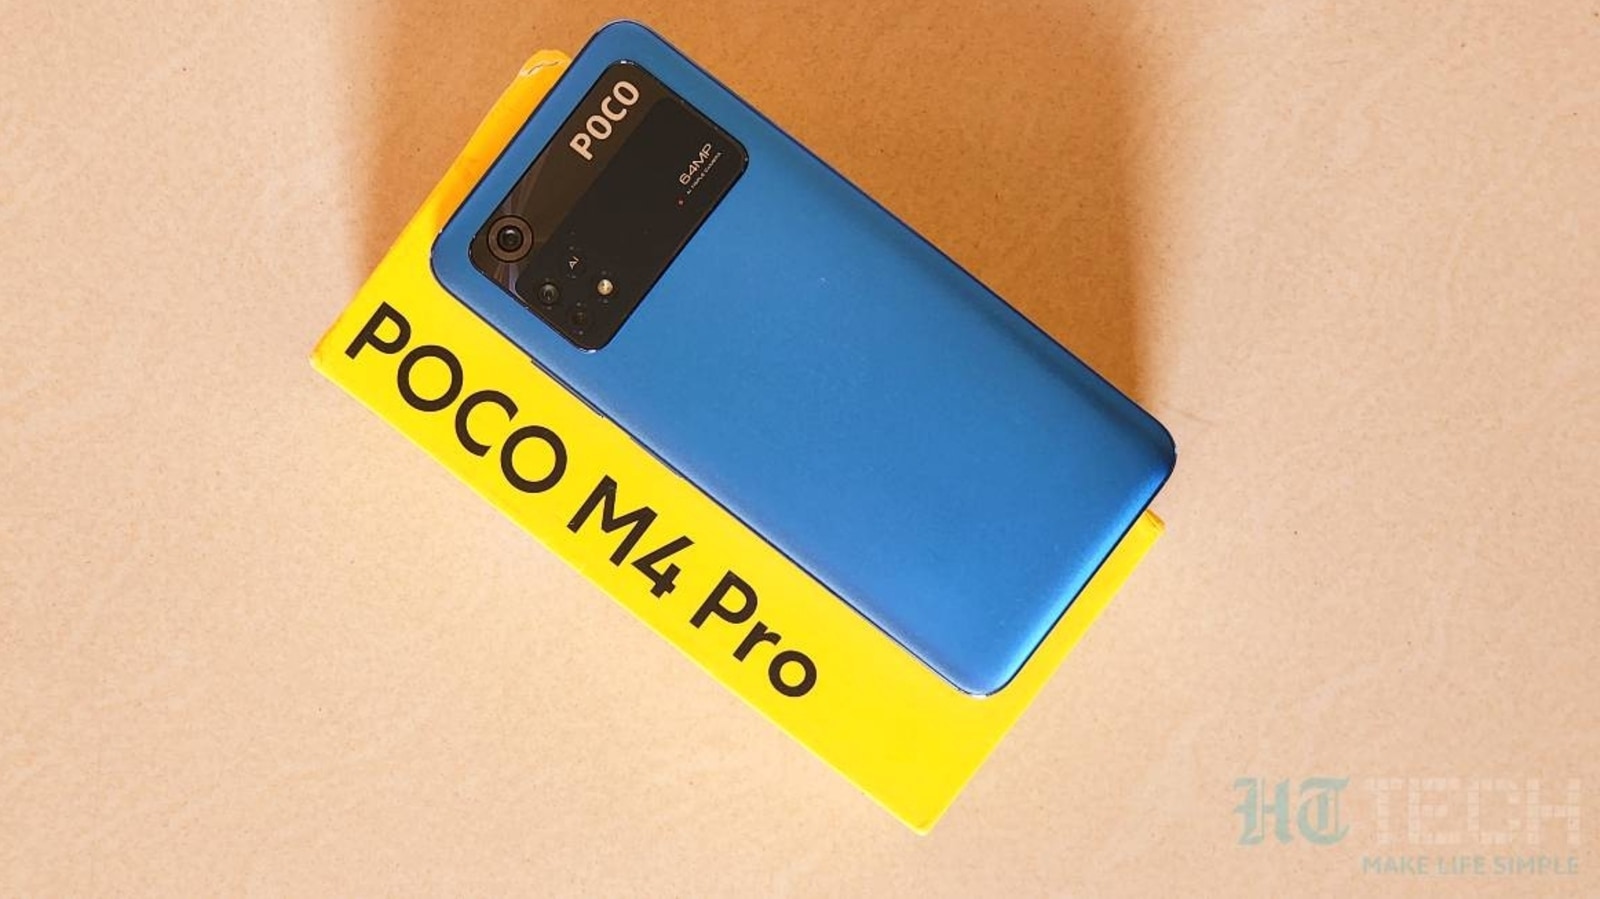 Poco M4 Pro 5G quick review: One of the better budget phones